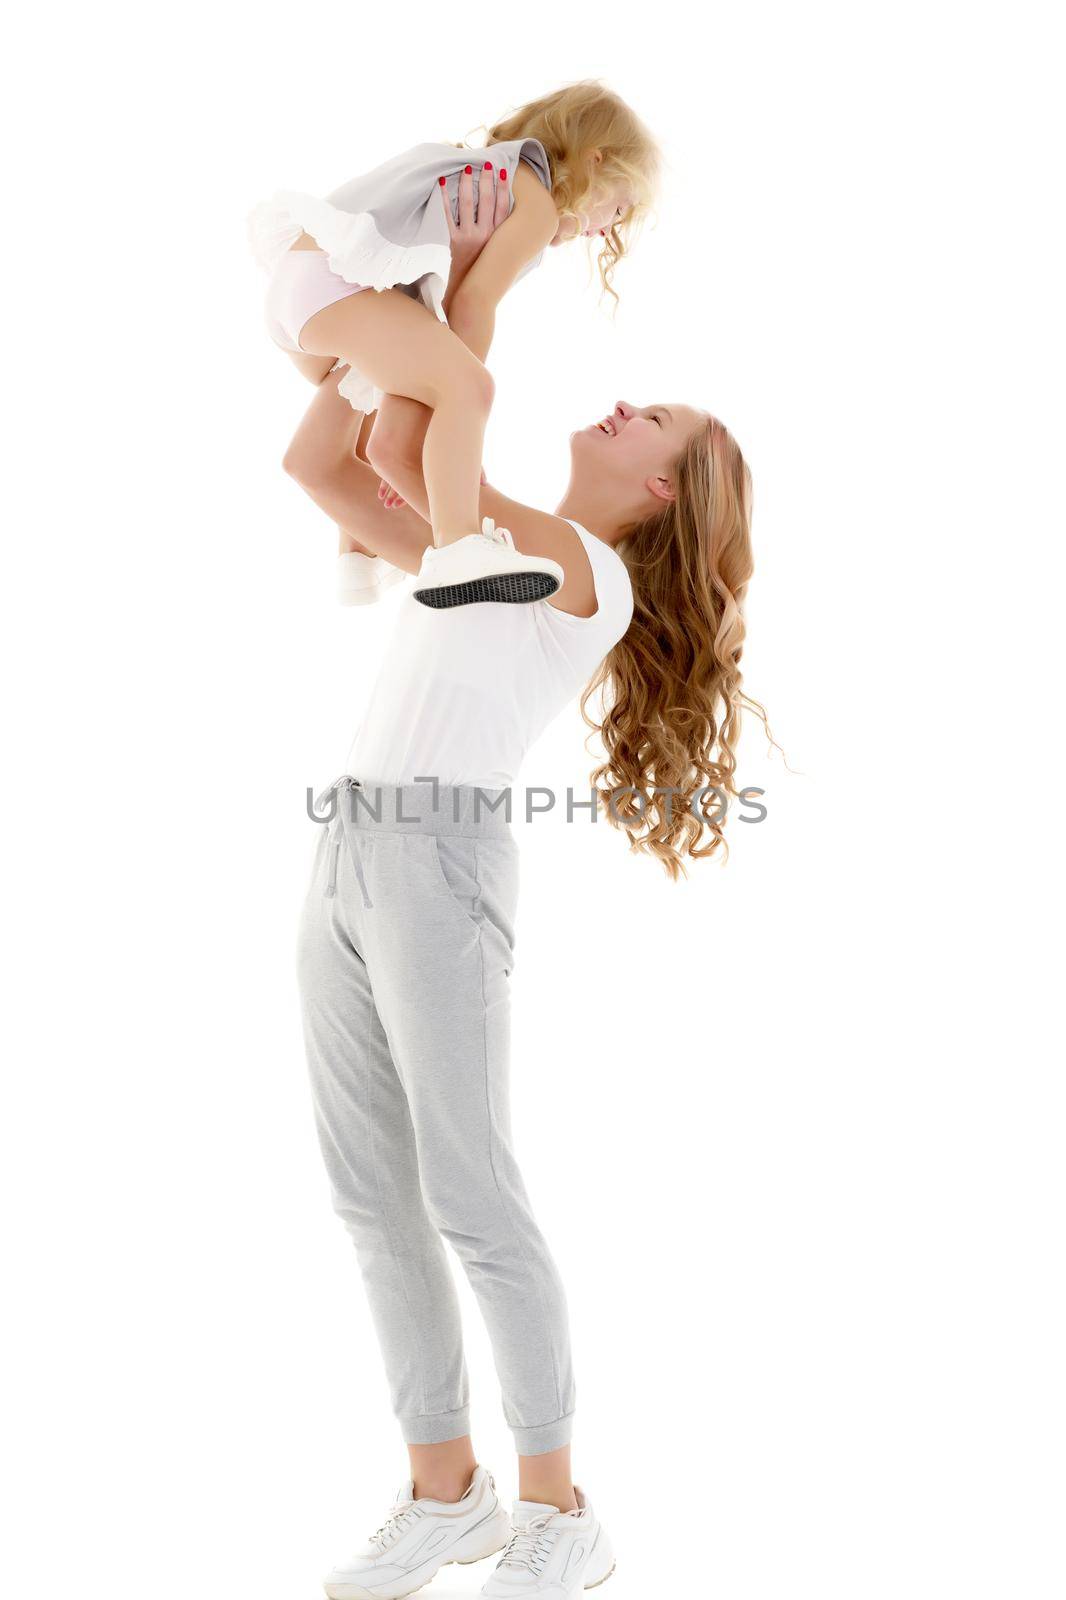 Beautiful young girl holding her little sister in her arms and looking at her with love. The concept of family happiness. Isolated on white background.